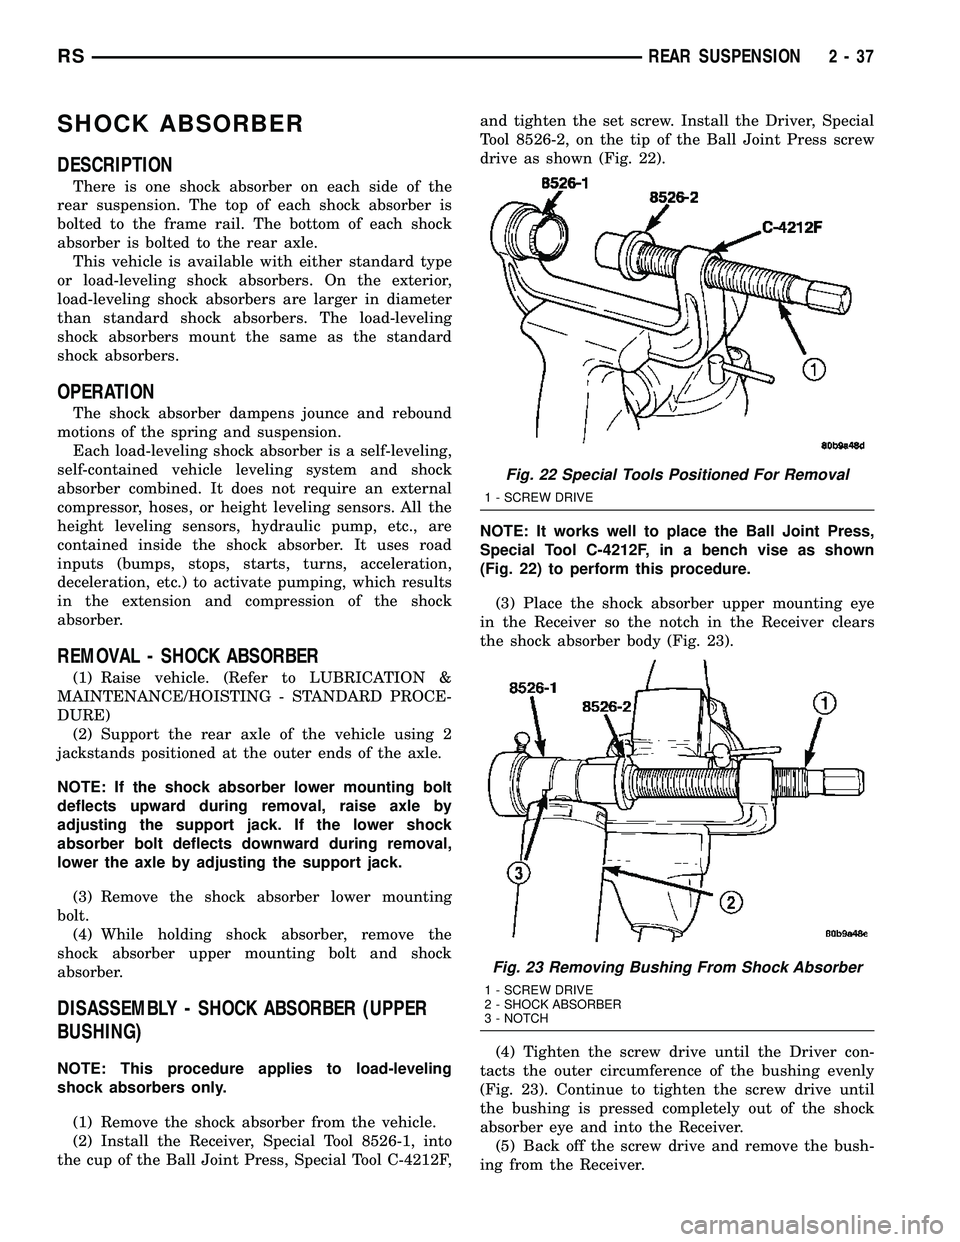 CHRYSLER VOYAGER 2004  Service Manual SHOCK ABSORBER
DESCRIPTION
There is one shock absorber on each side of the
rear suspension. The top of each shock absorber is
bolted to the frame rail. The bottom of each shock
absorber is bolted to t